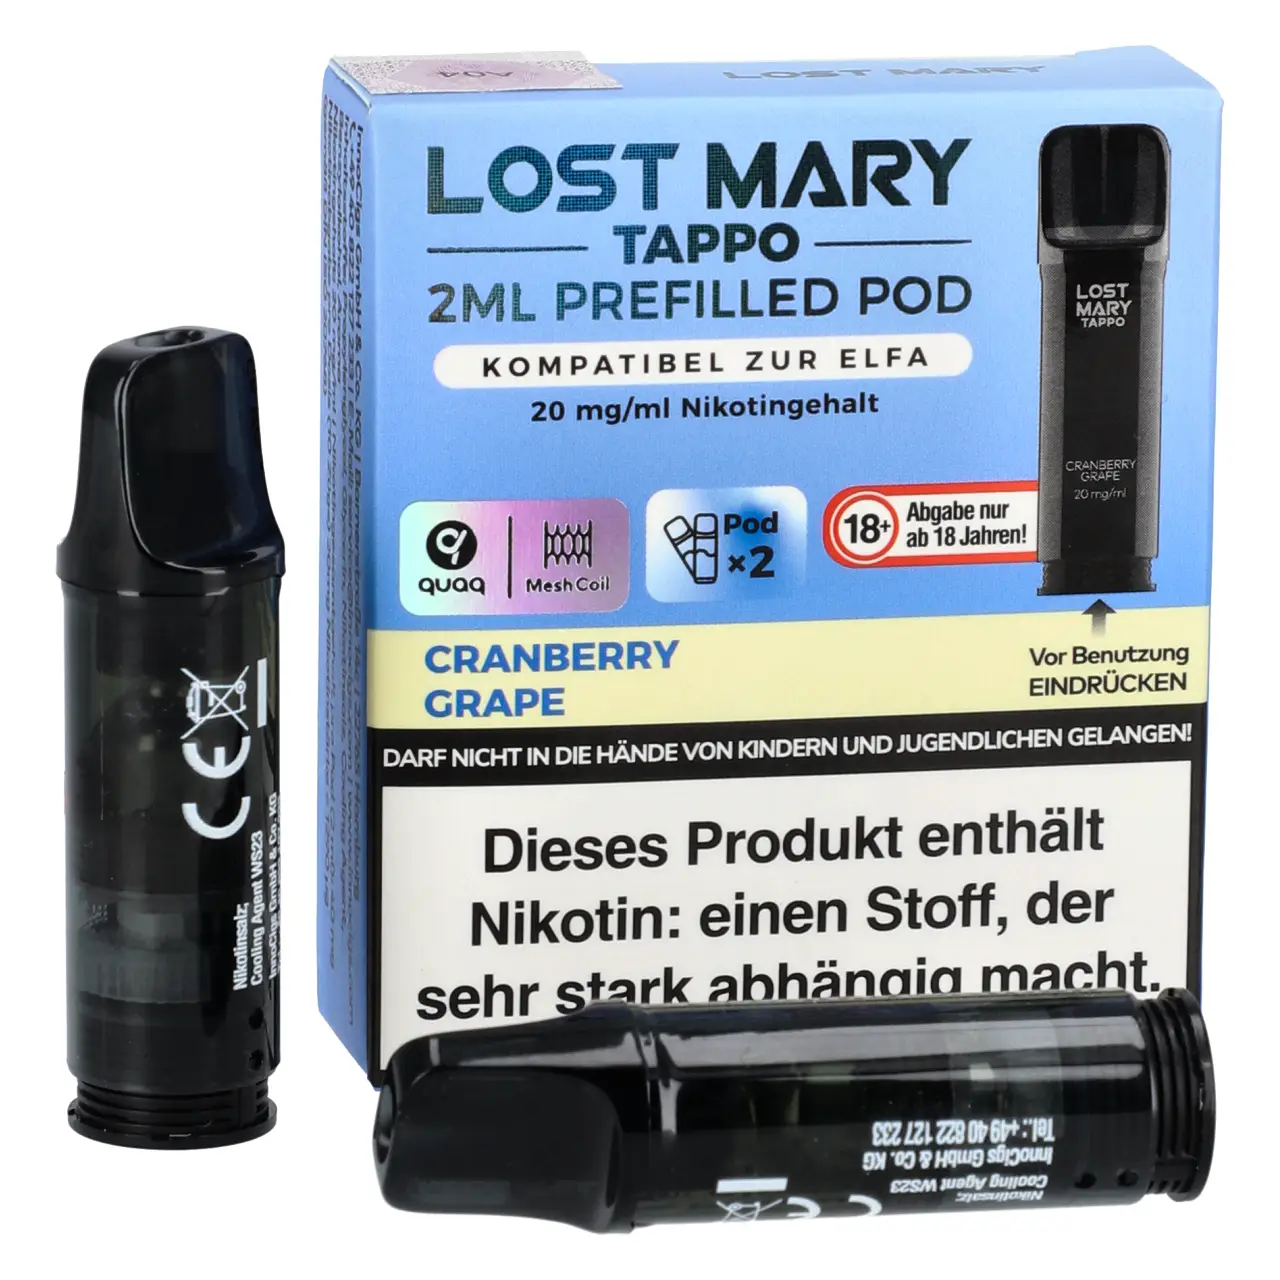 Lost Mary Tappo Prefilled Pod - Cranberry Grape - 2er Packung